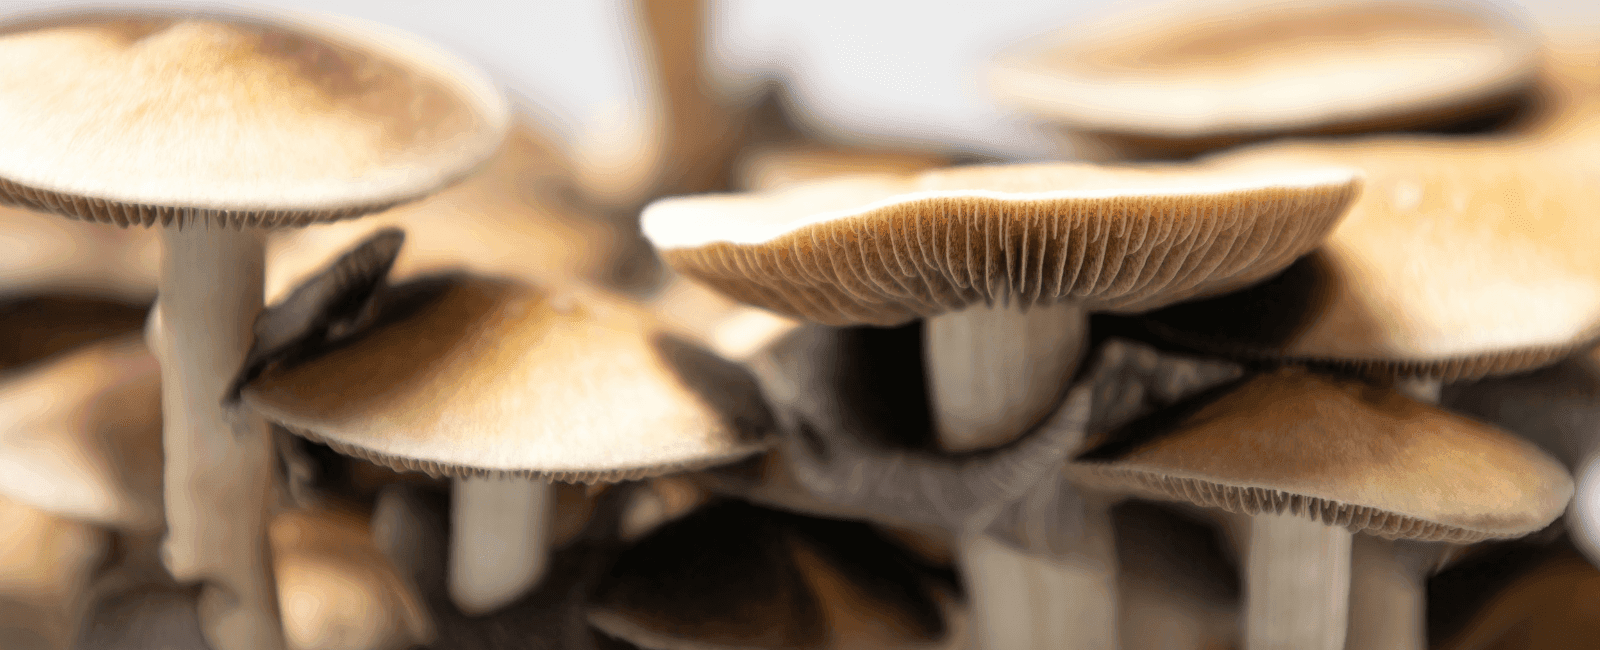 Focus Shifts to Psilocybin Therapy in New Jersey's Revised Legislation